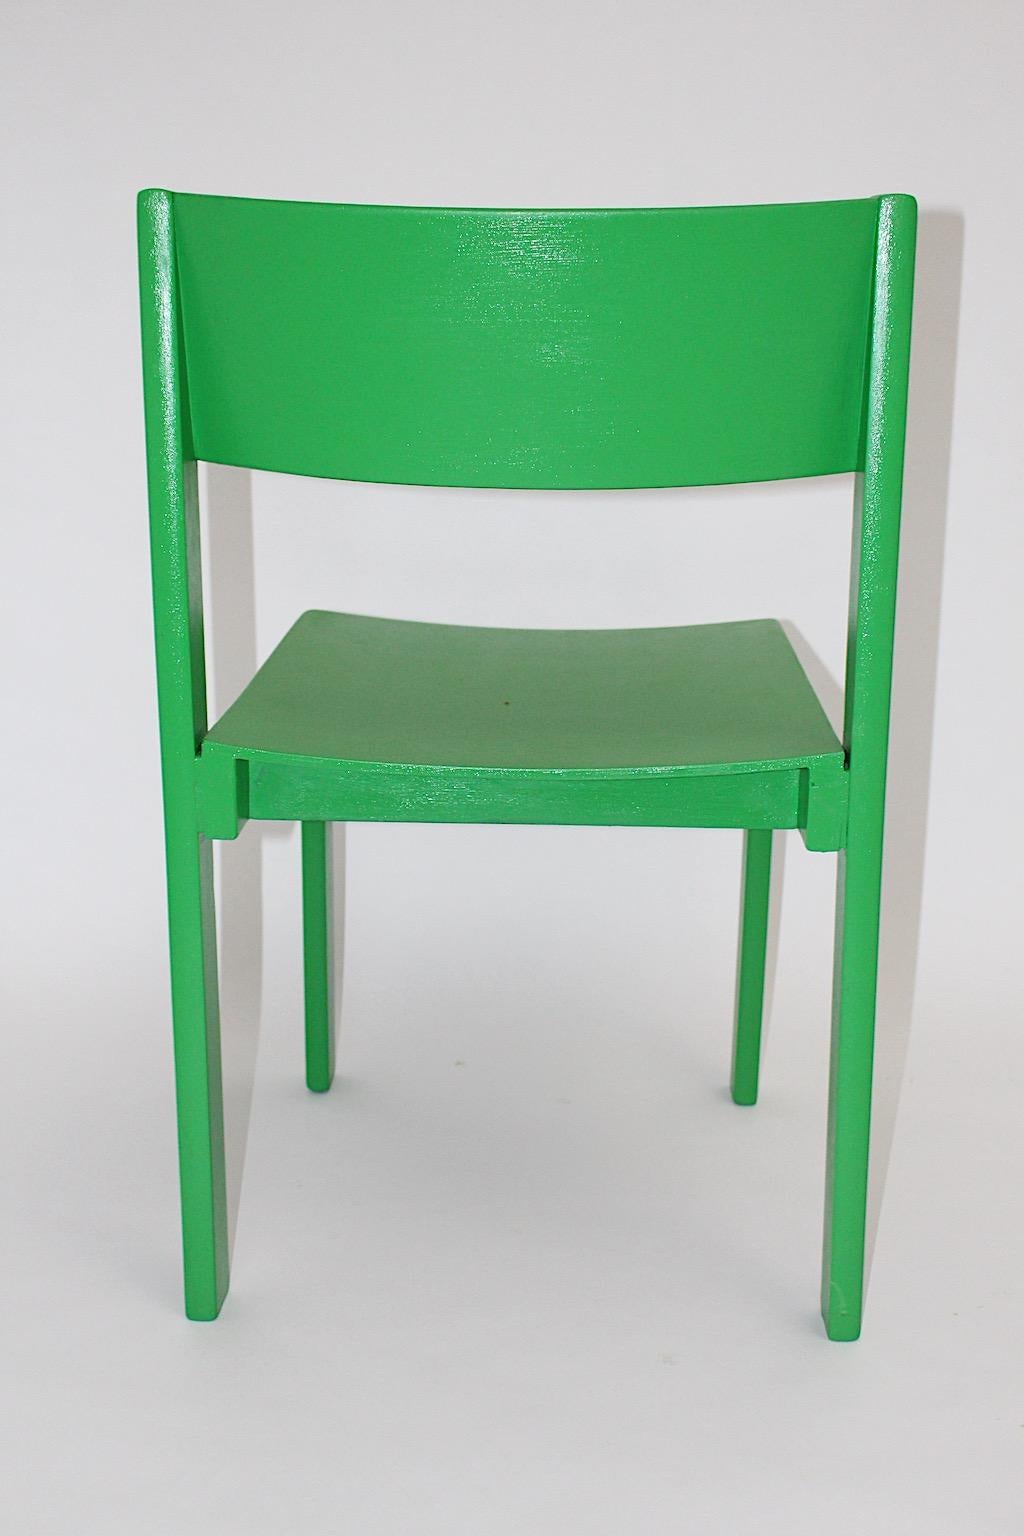 Modernist Green Vintage Beech Stackable Dining Chairs 1950s Austria For Sale 6